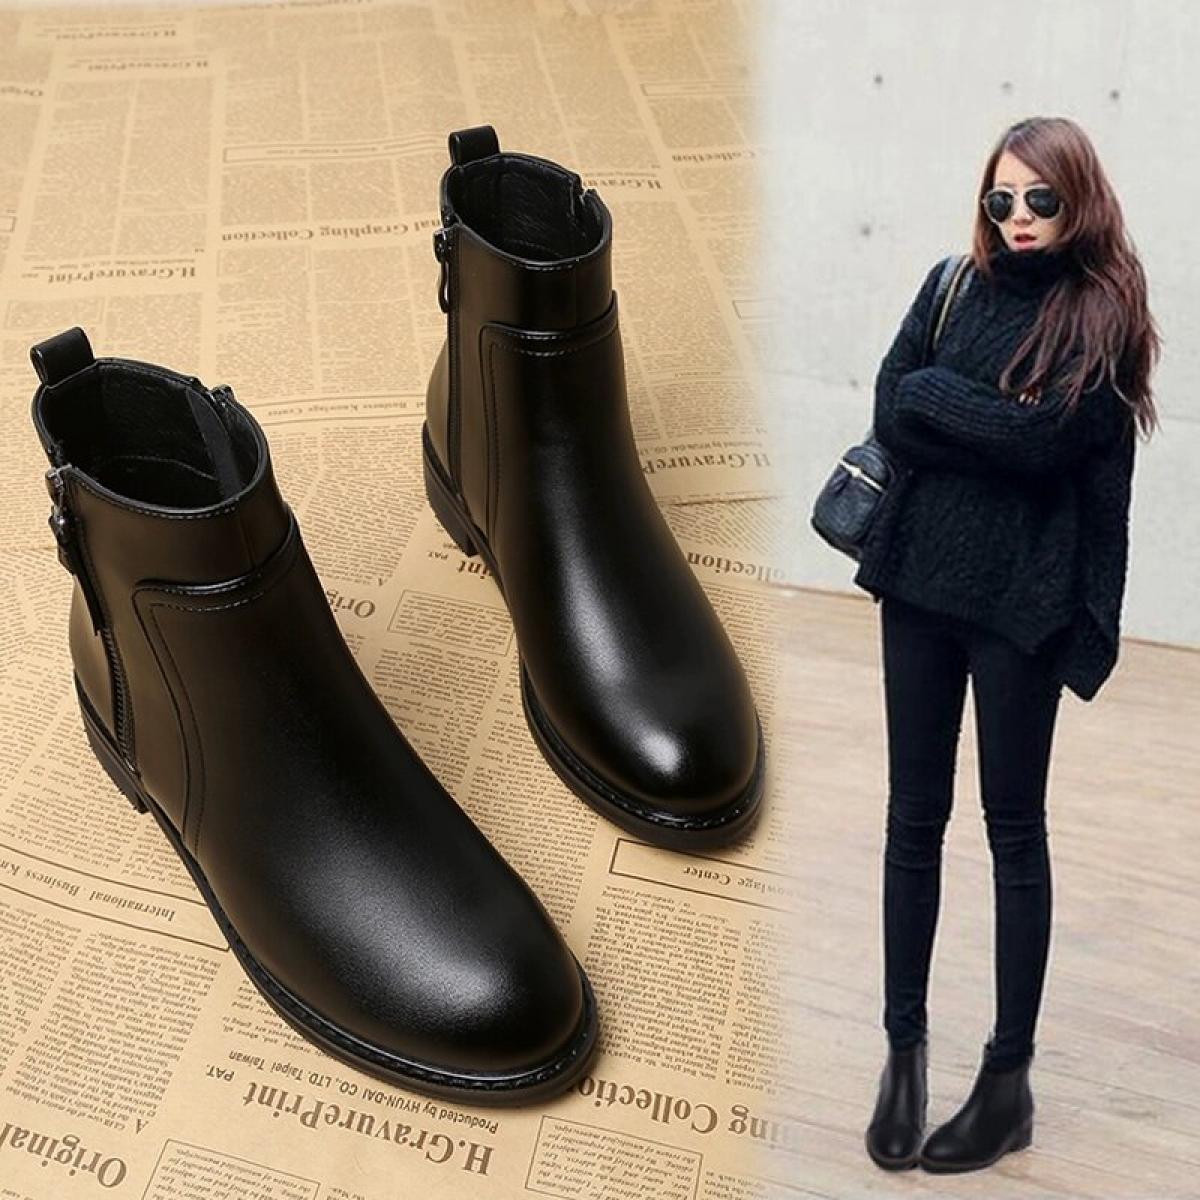 Womens Casual Chelsea Boots Original Leather Shoes Business Office Work Boot Brand Designer Black Stylish Ankle Botas Bo